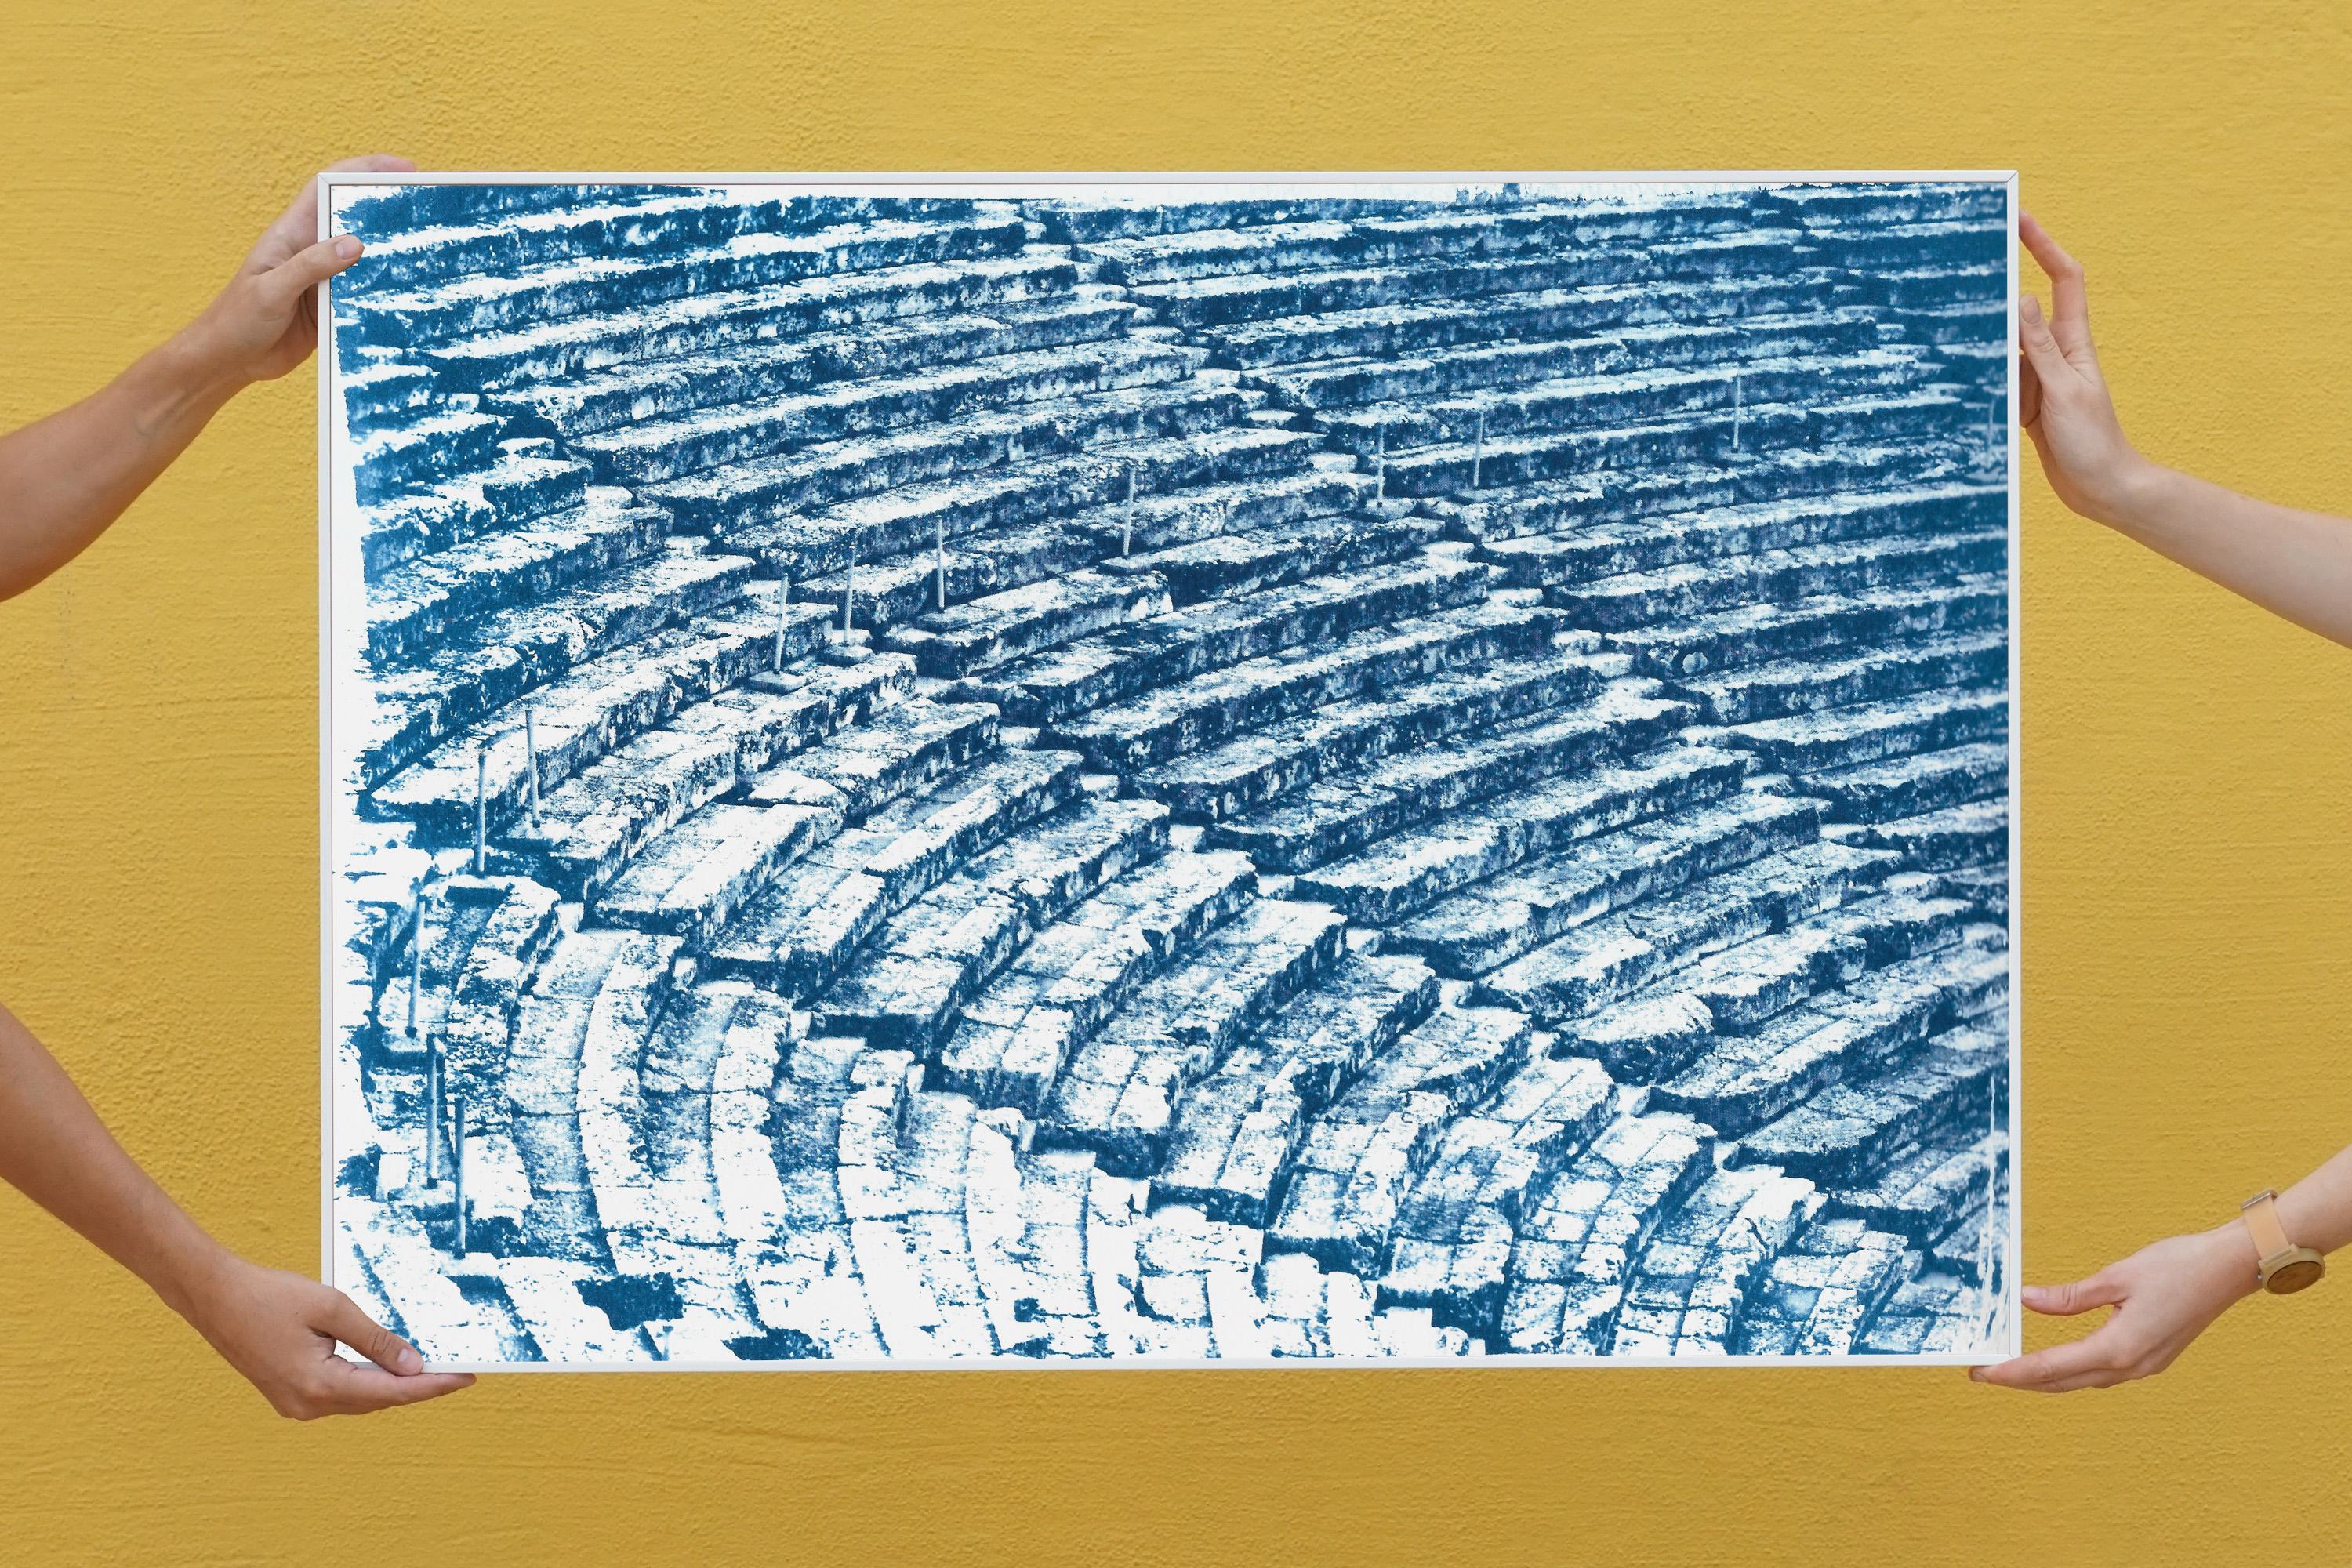 Greek Architecture Blueprint of Ancient Amphitheatre Cyanotype Print, Watercolor - Academic Photograph by Kind of Cyan